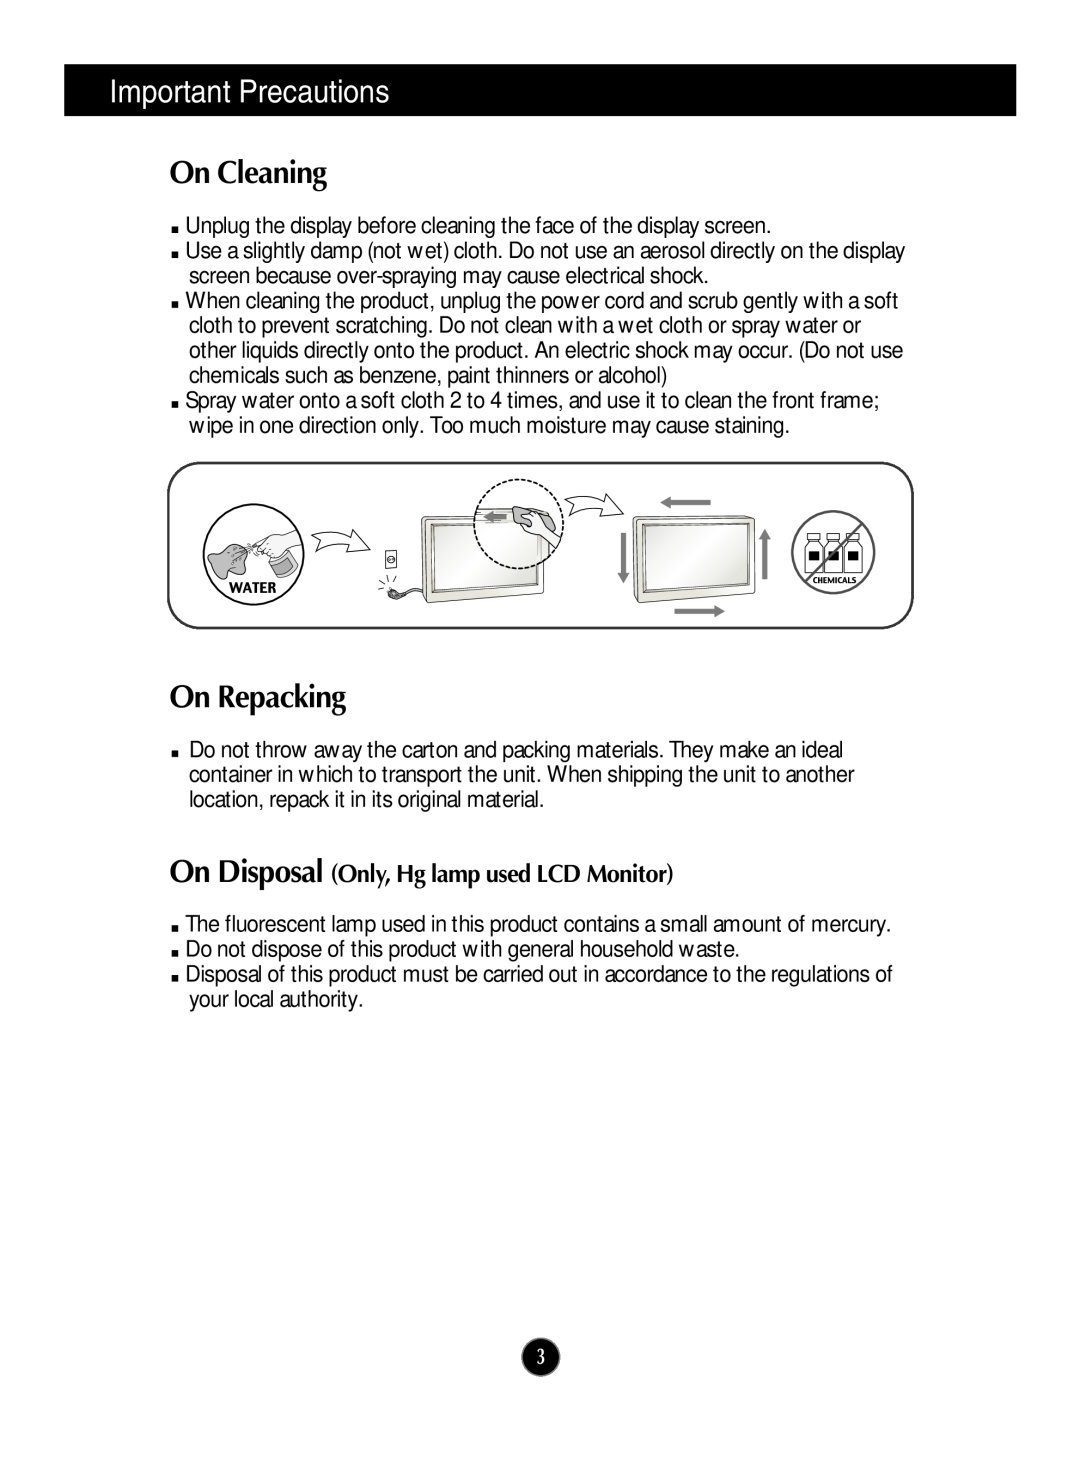 LG Electronics W2243S On Cleaning, On Repacking, Important Precautions, On Disposal Only, Hg lamp used LCD Monitor 